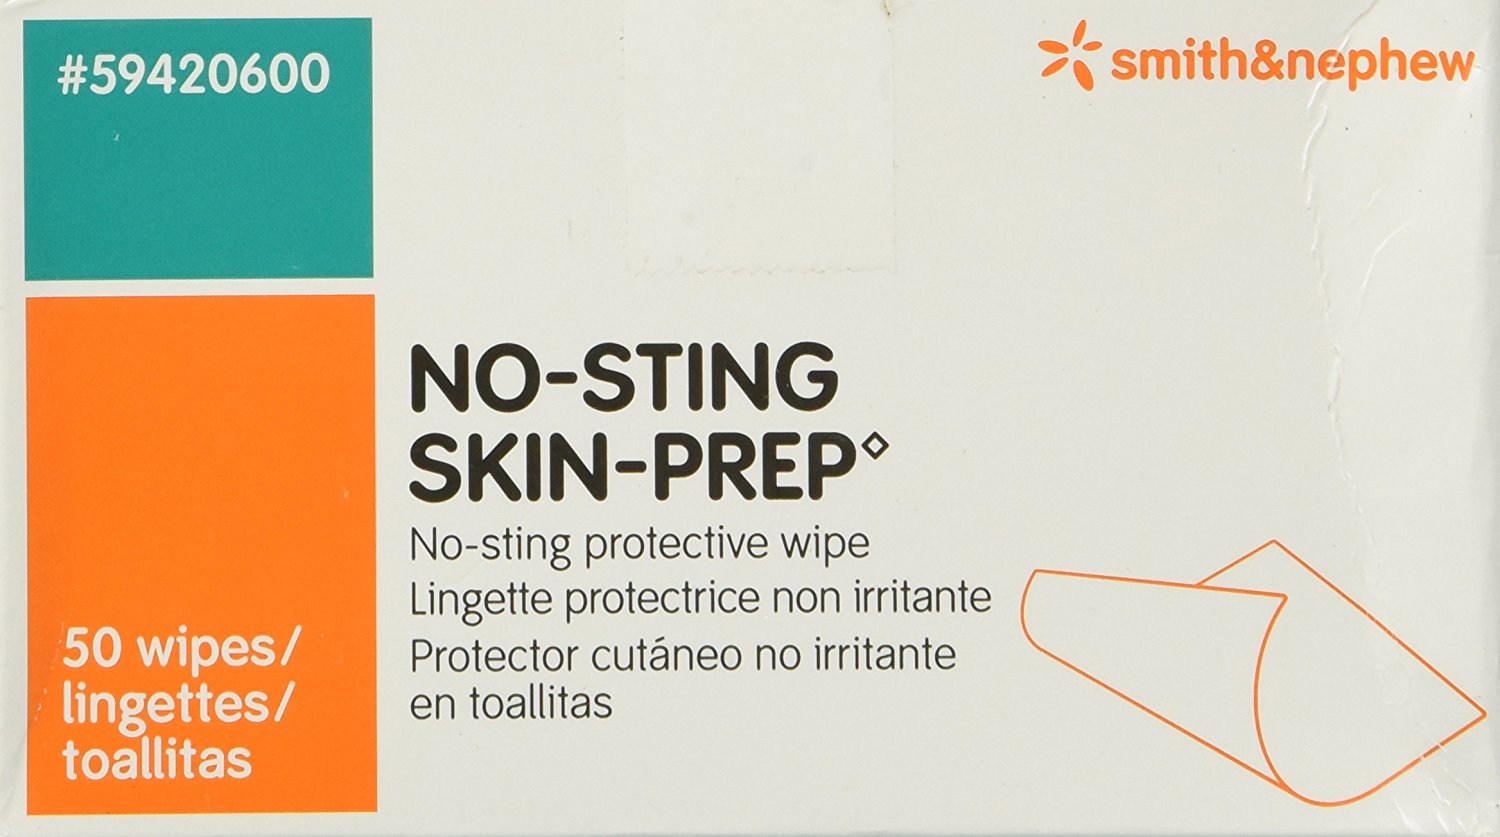 Smith & Nephew No-sting Skin-Prep Protective Wipes Alcohol-free (Box of 50 Each) - image 1 of 1